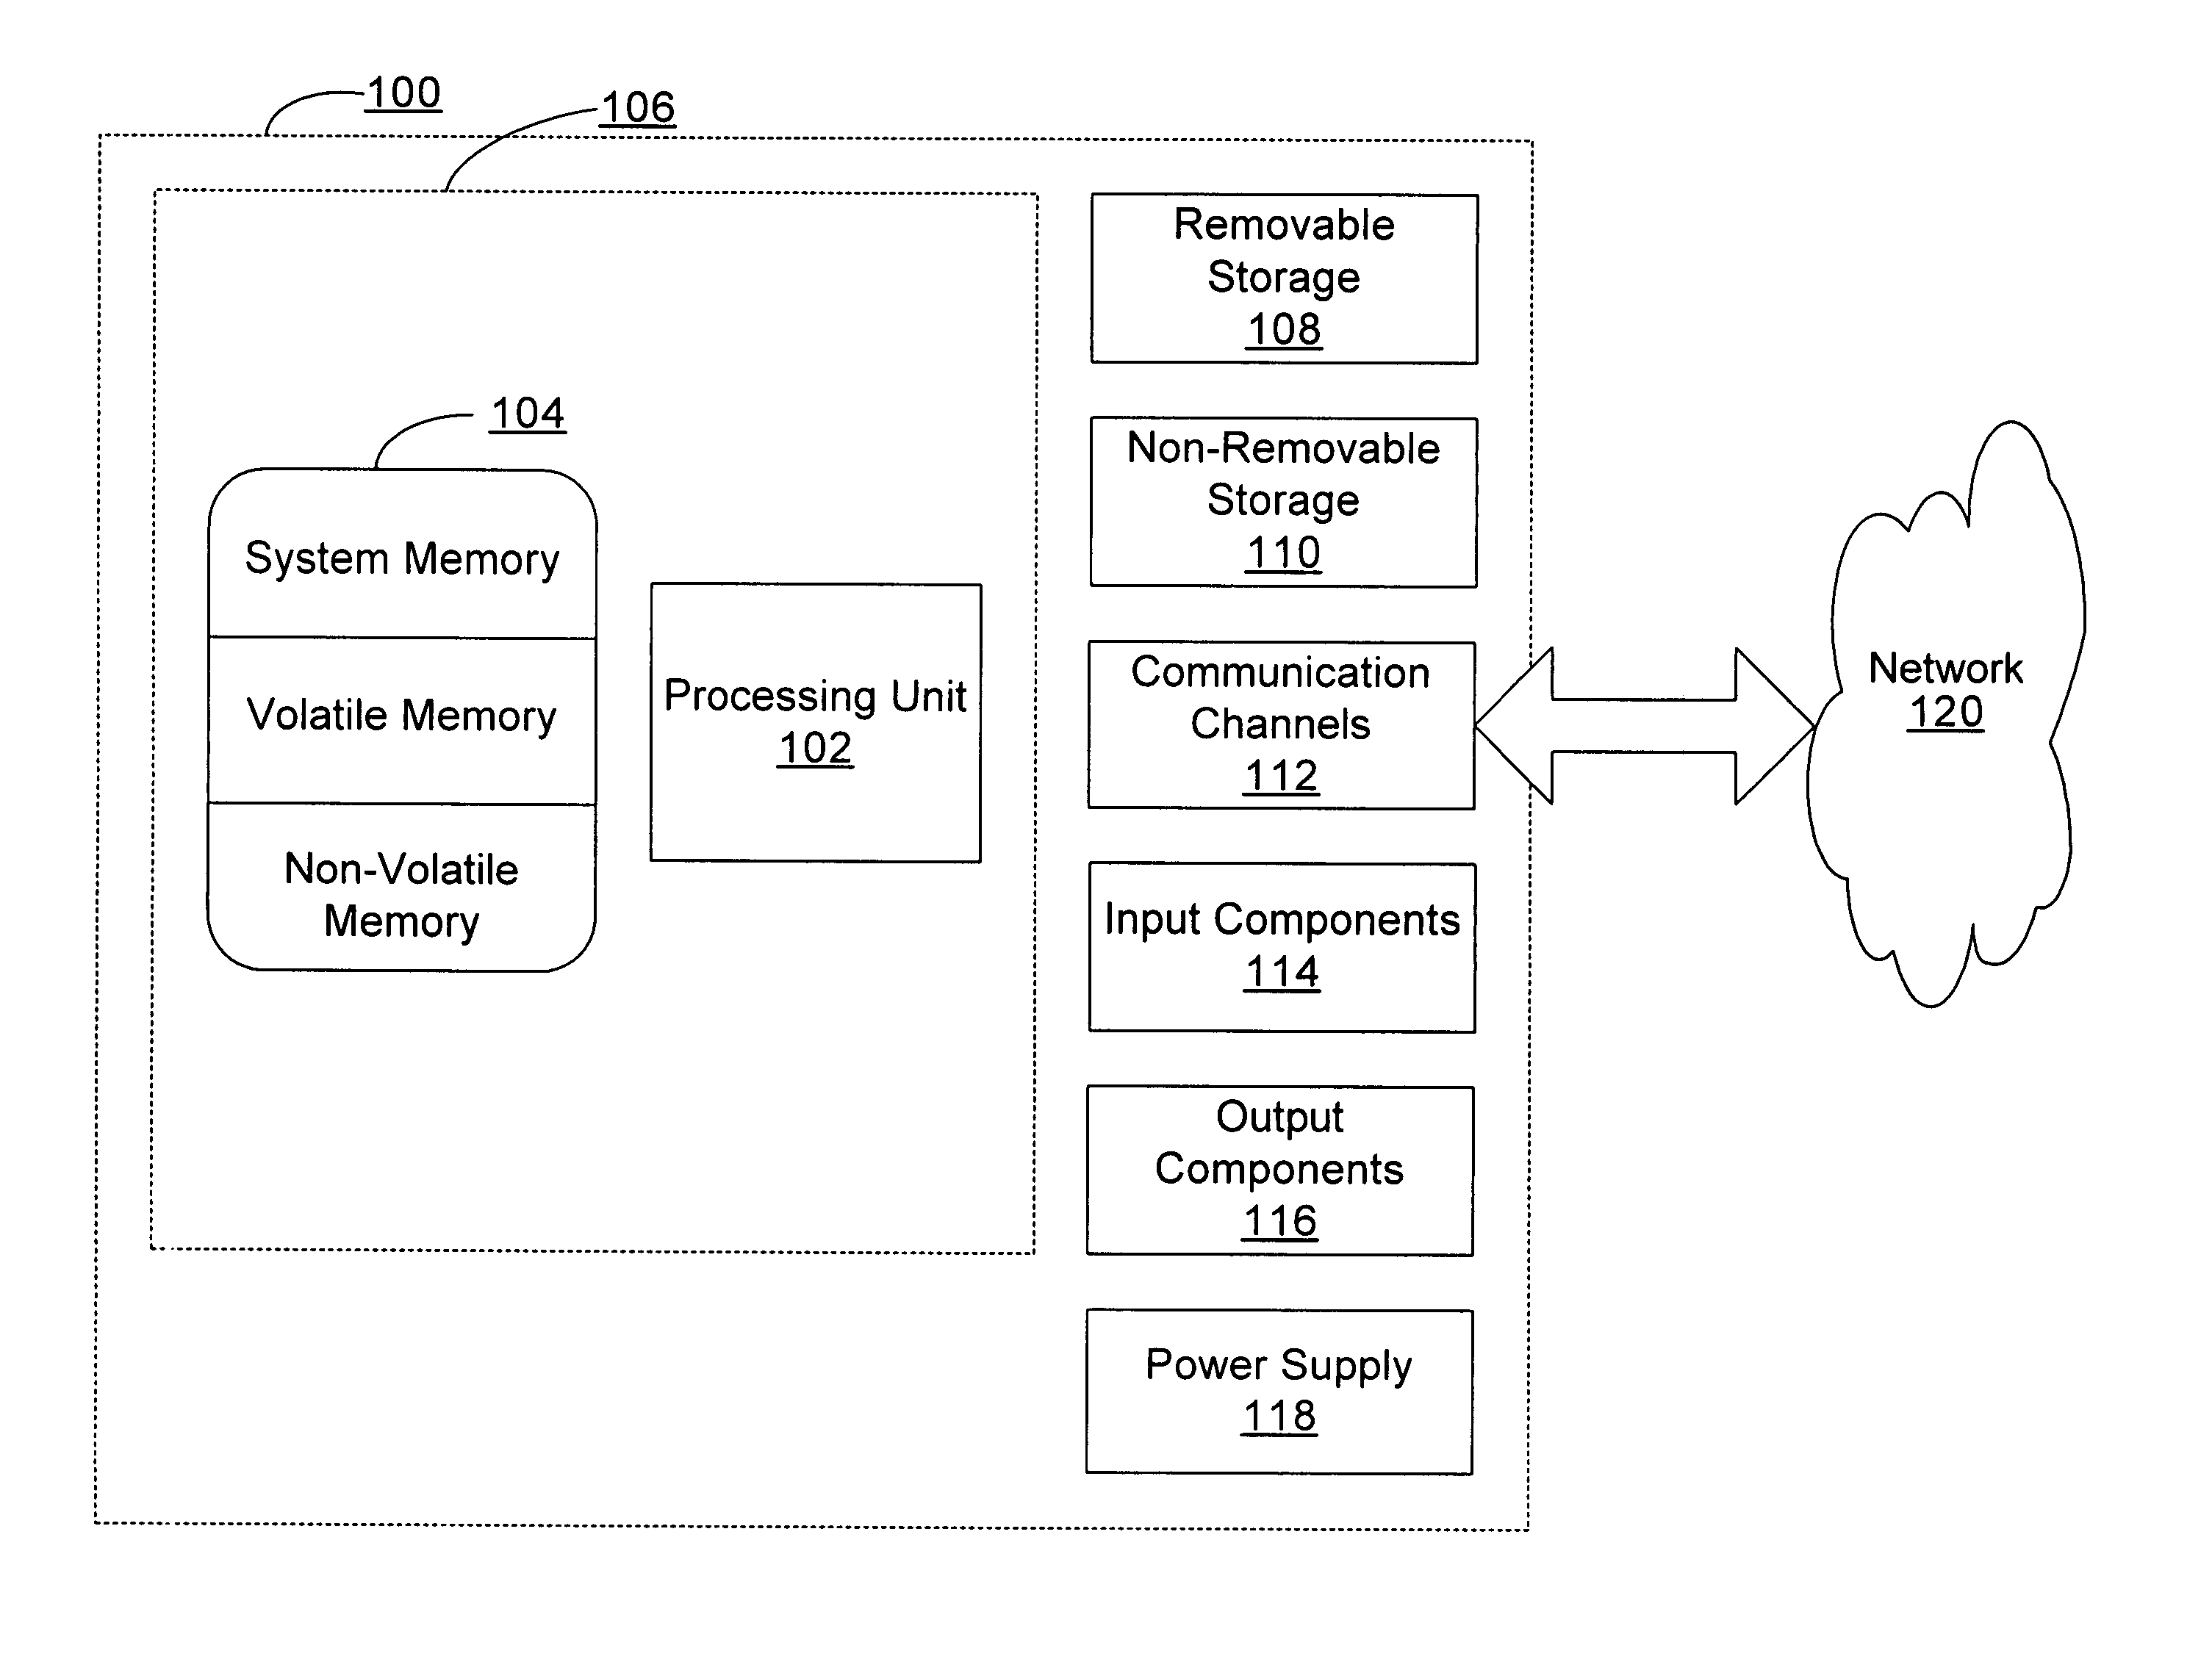 Method for persisting a unicode compatible offline address